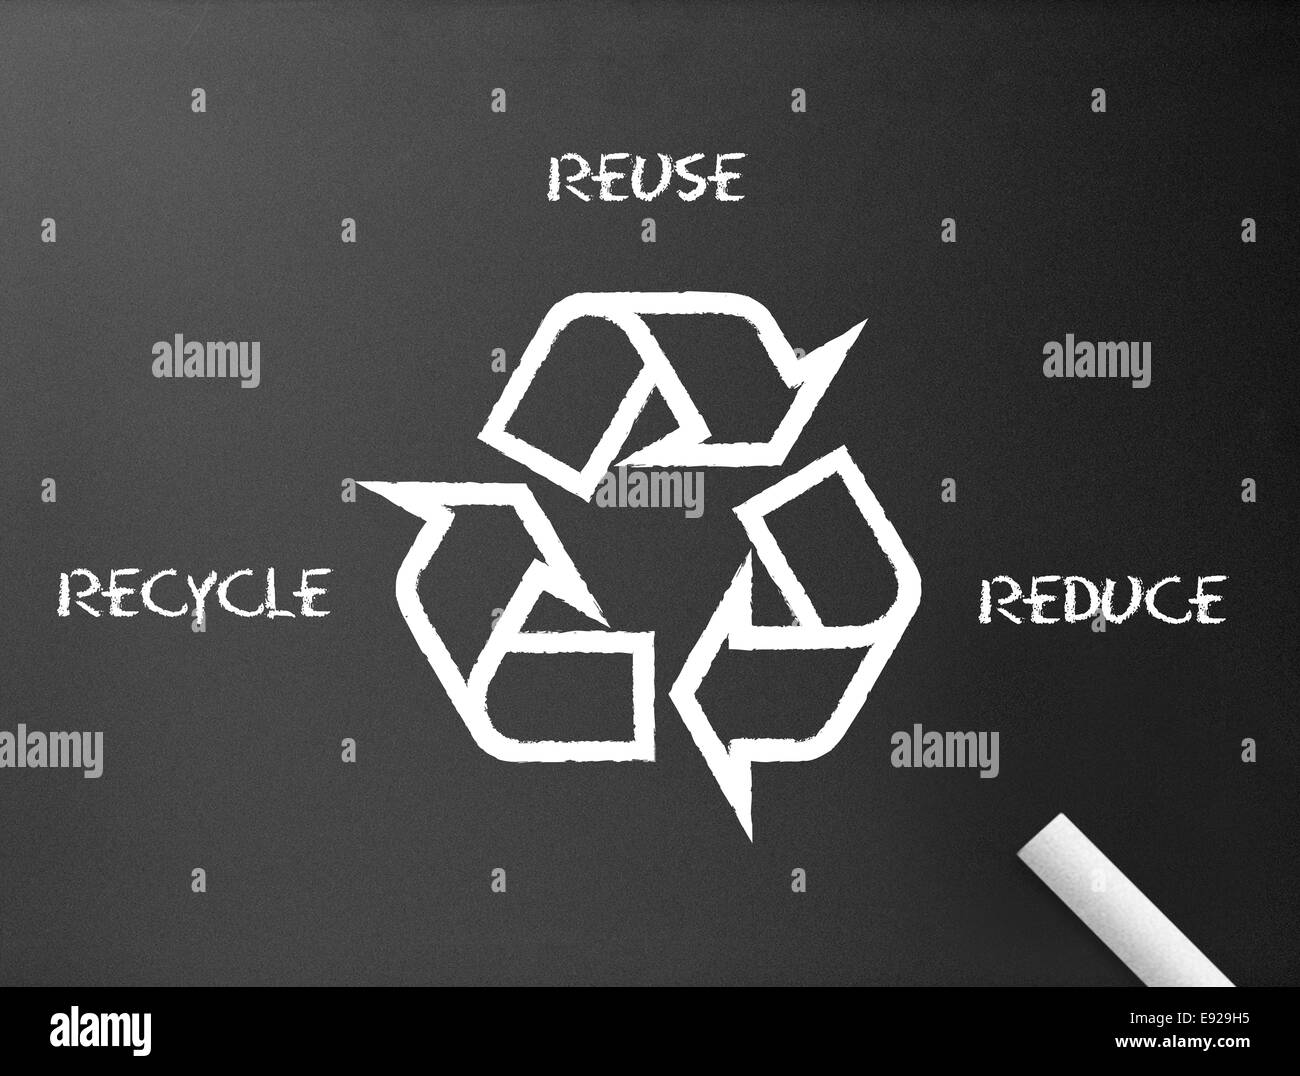 Chalkboard - Recycle, reduce, reuse Stock Photo